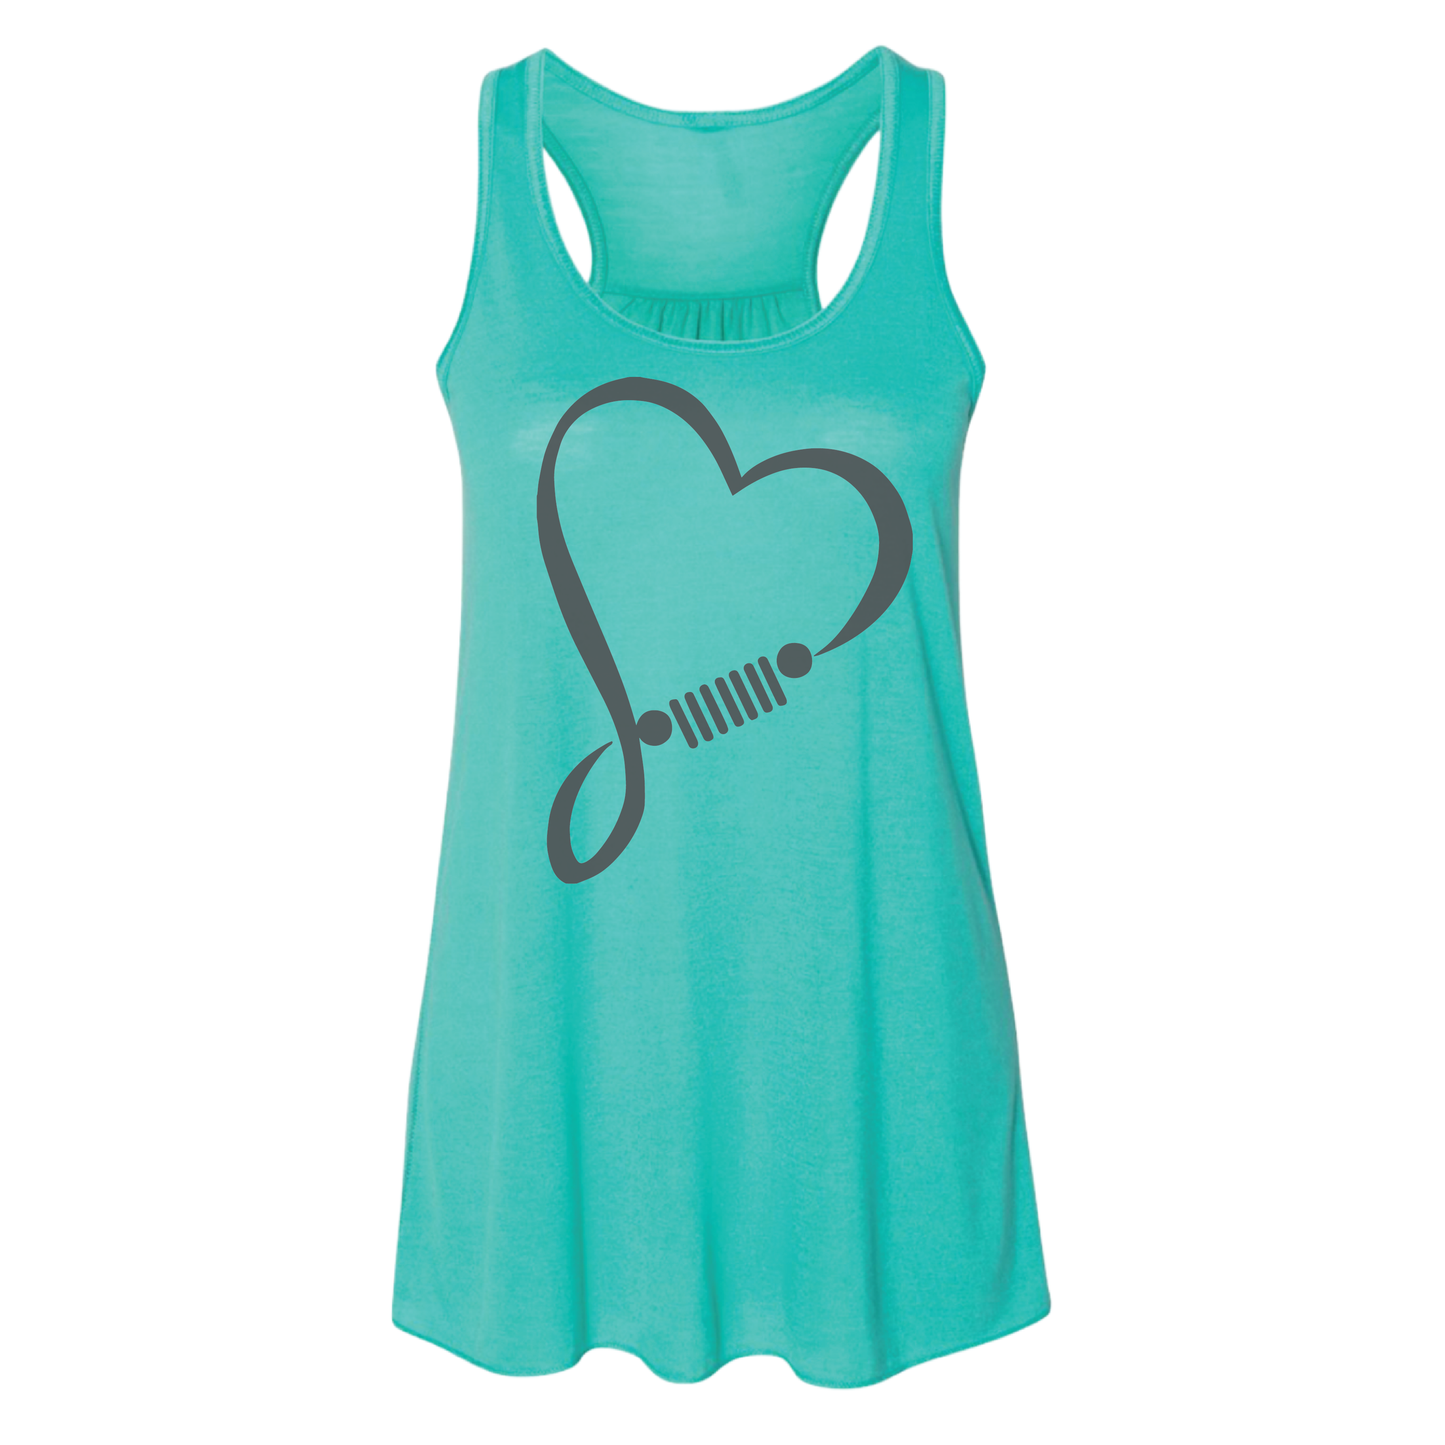 SSS Heart - Shirt, Tank Top, Long Sleeve or Hoodie - Available in Multiple Colors